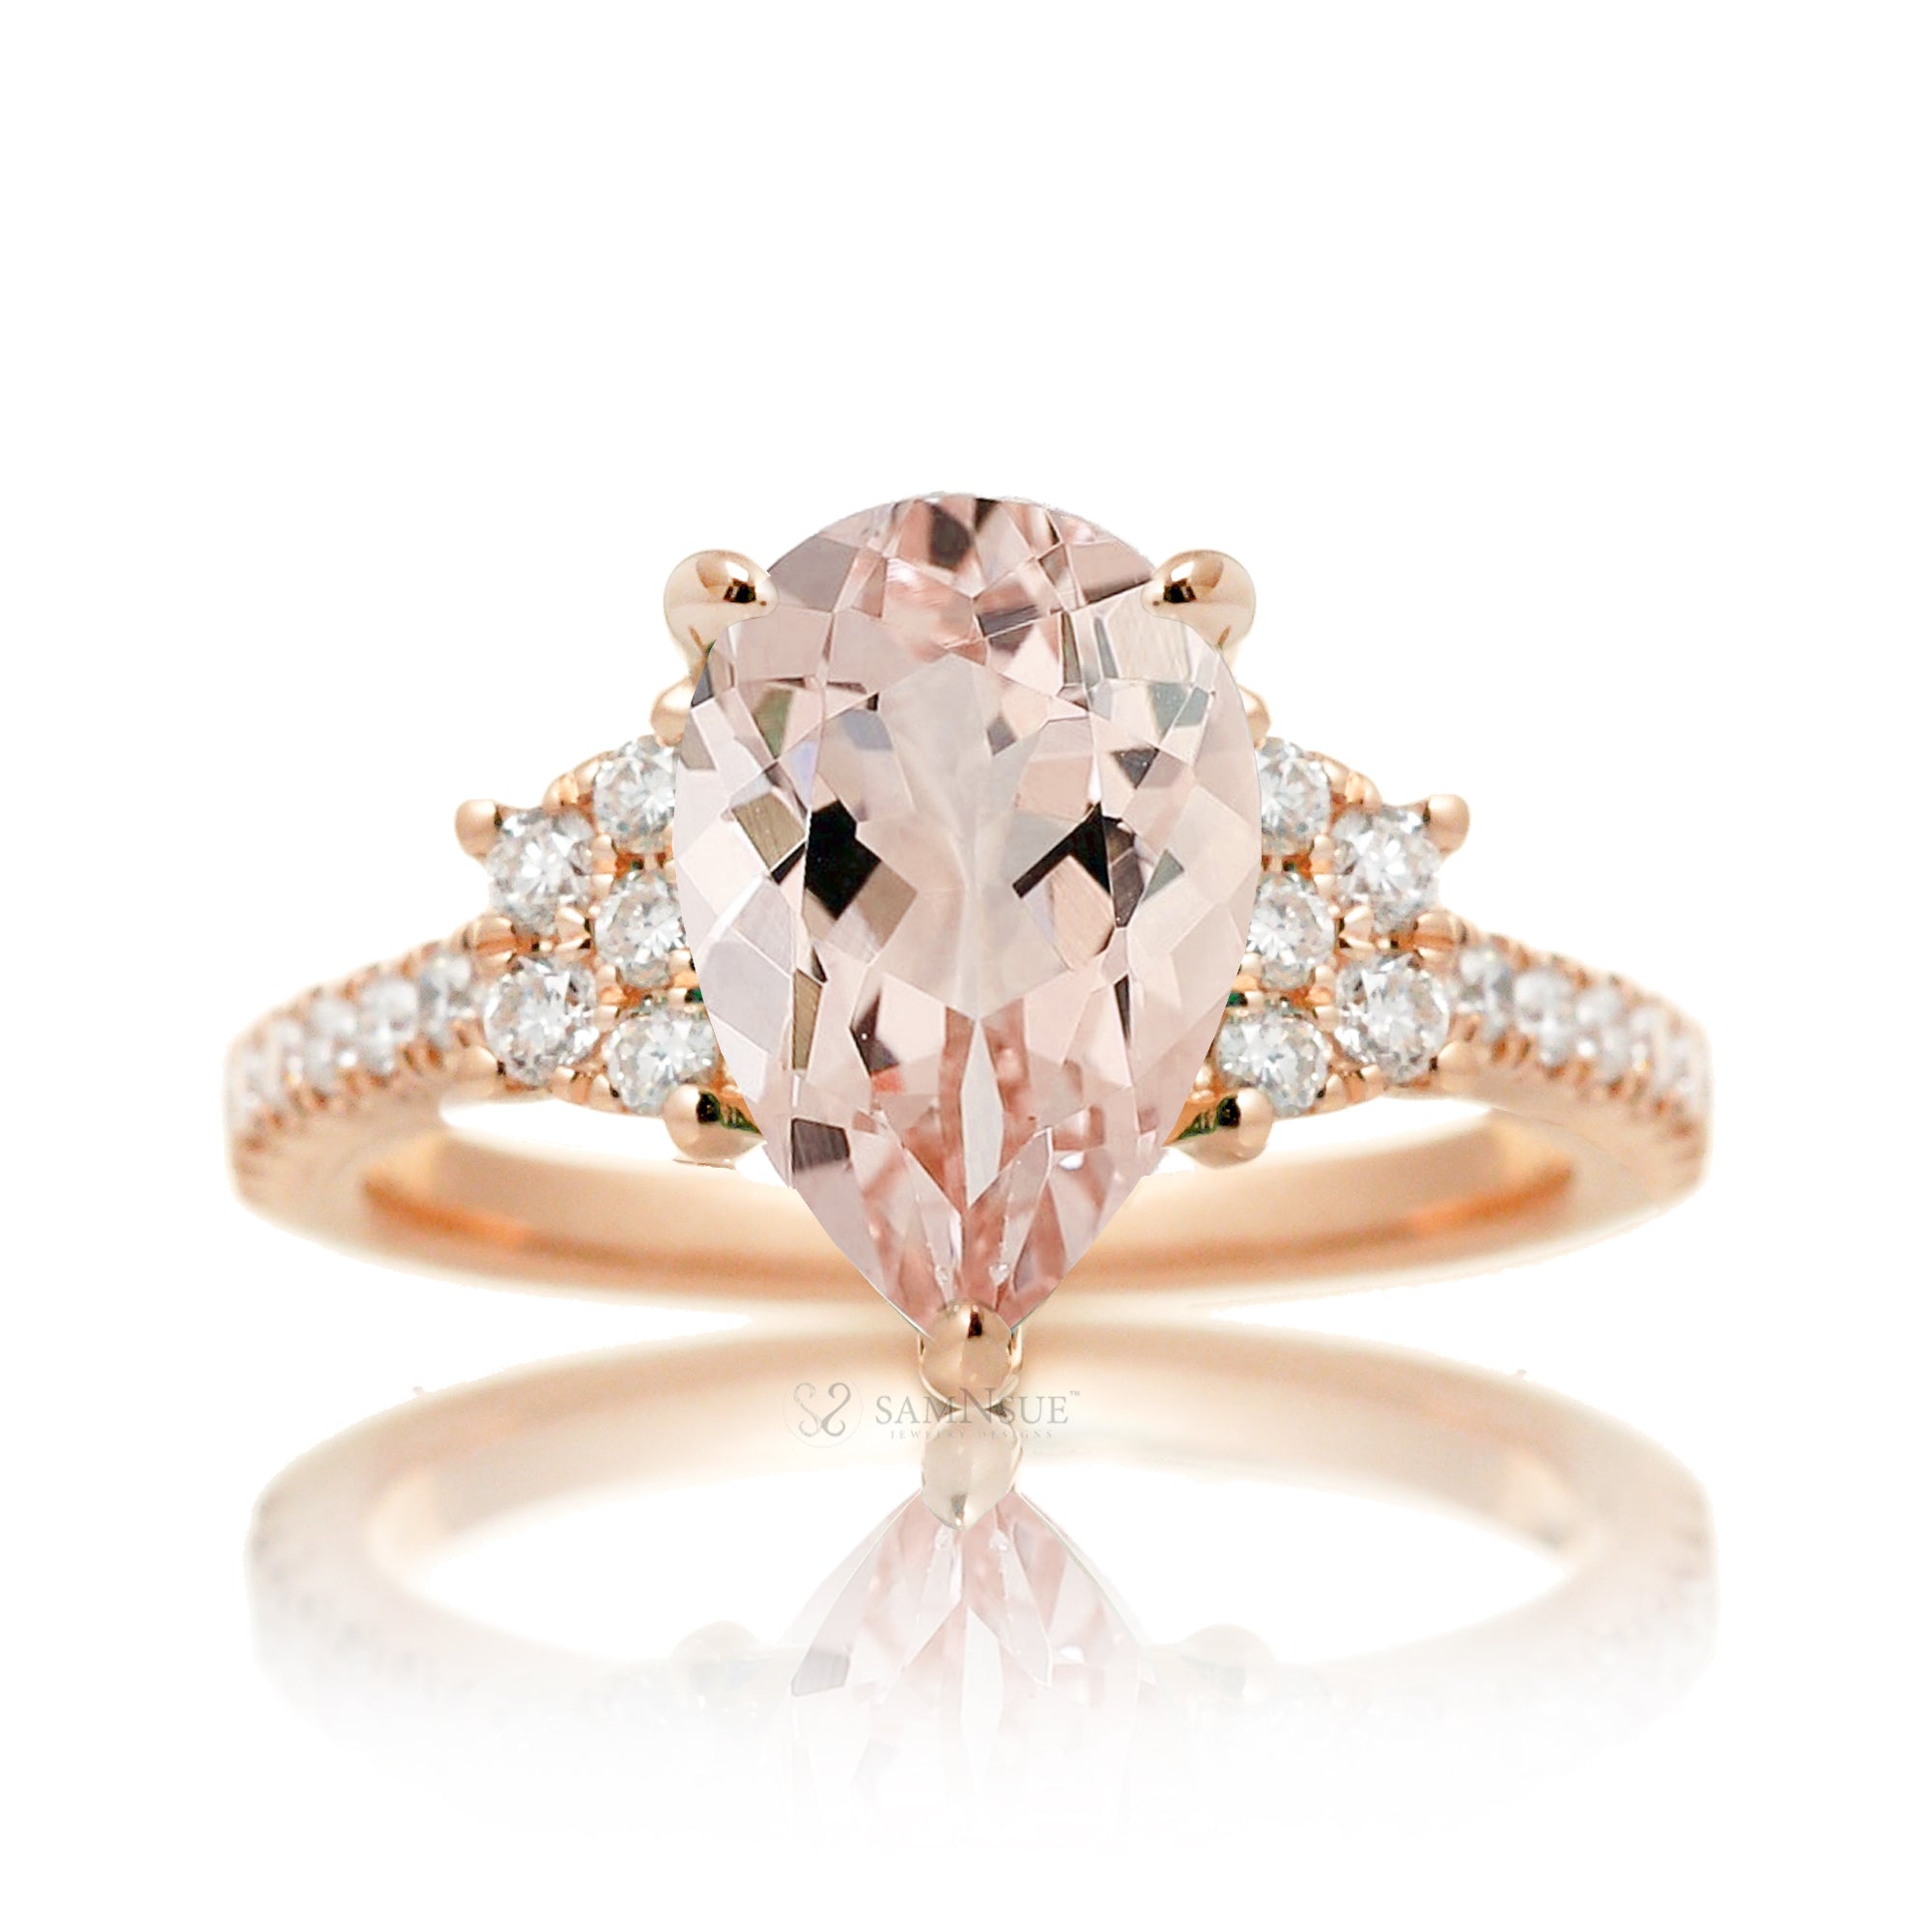 Pear morganite engagement ring with diamond accent in a trapezoid shape in rose gold